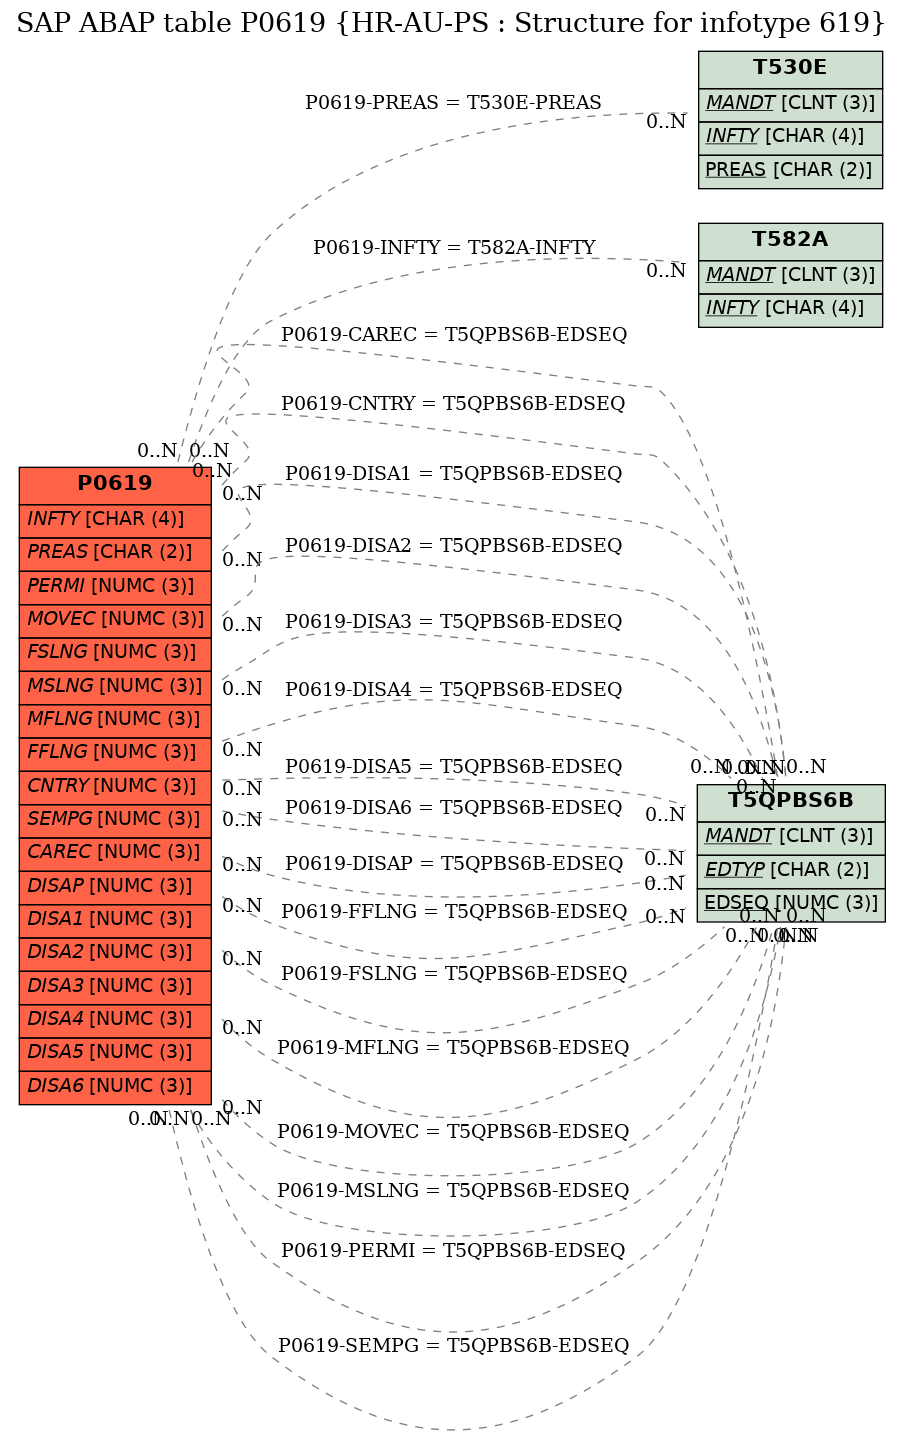 E-R Diagram for table P0619 (HR-AU-PS : Structure for infotype 619)